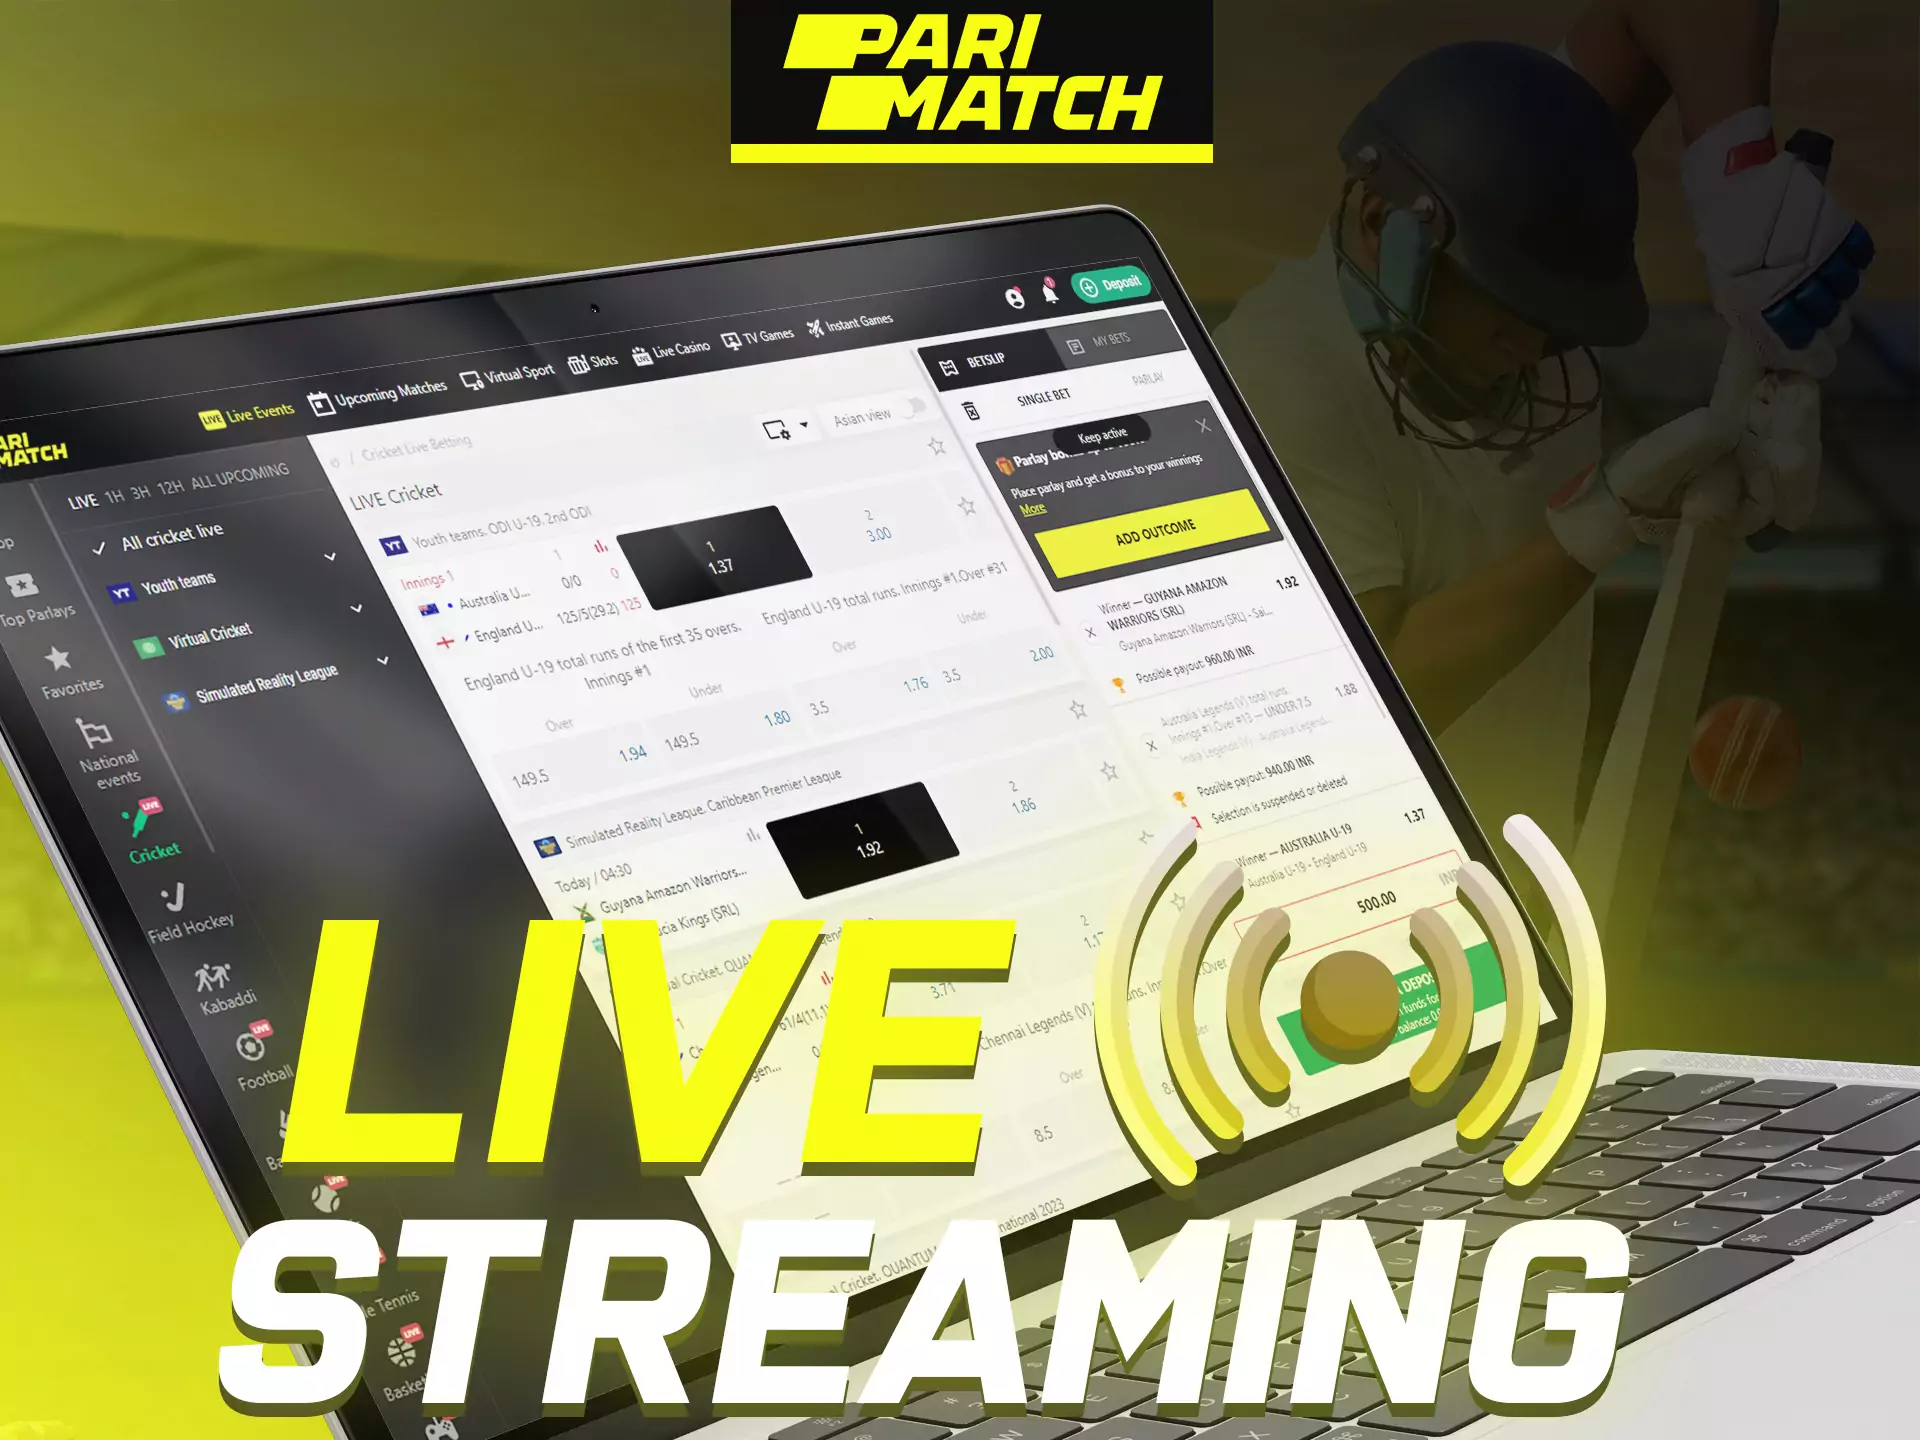 Watch and bet in live format at Parimatch.